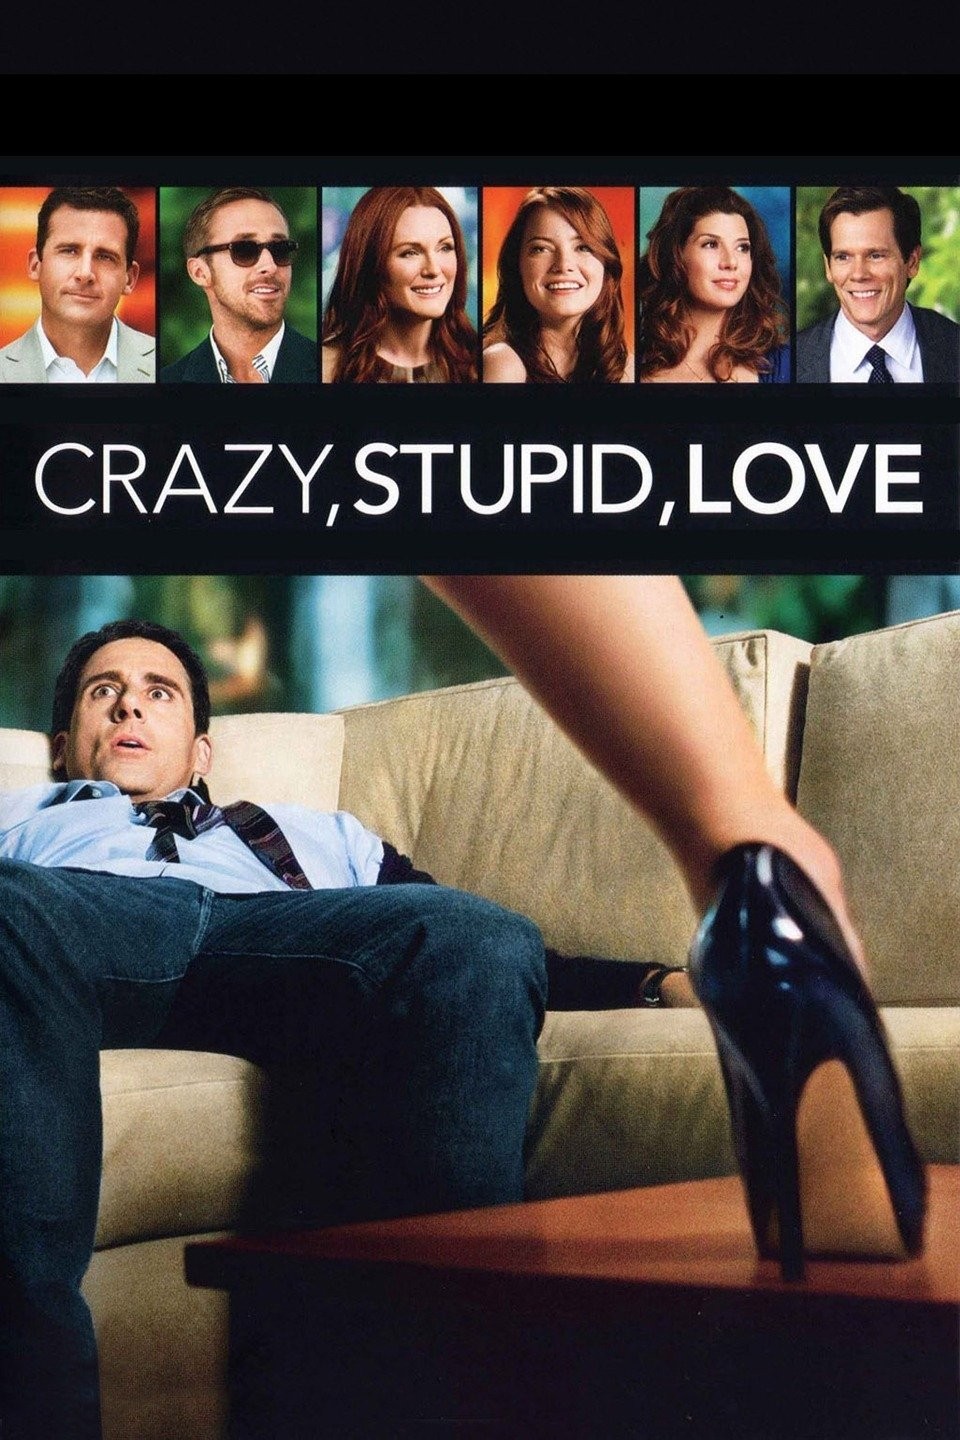 Crazy, Stupid, Love at an AMC Theatre near you.